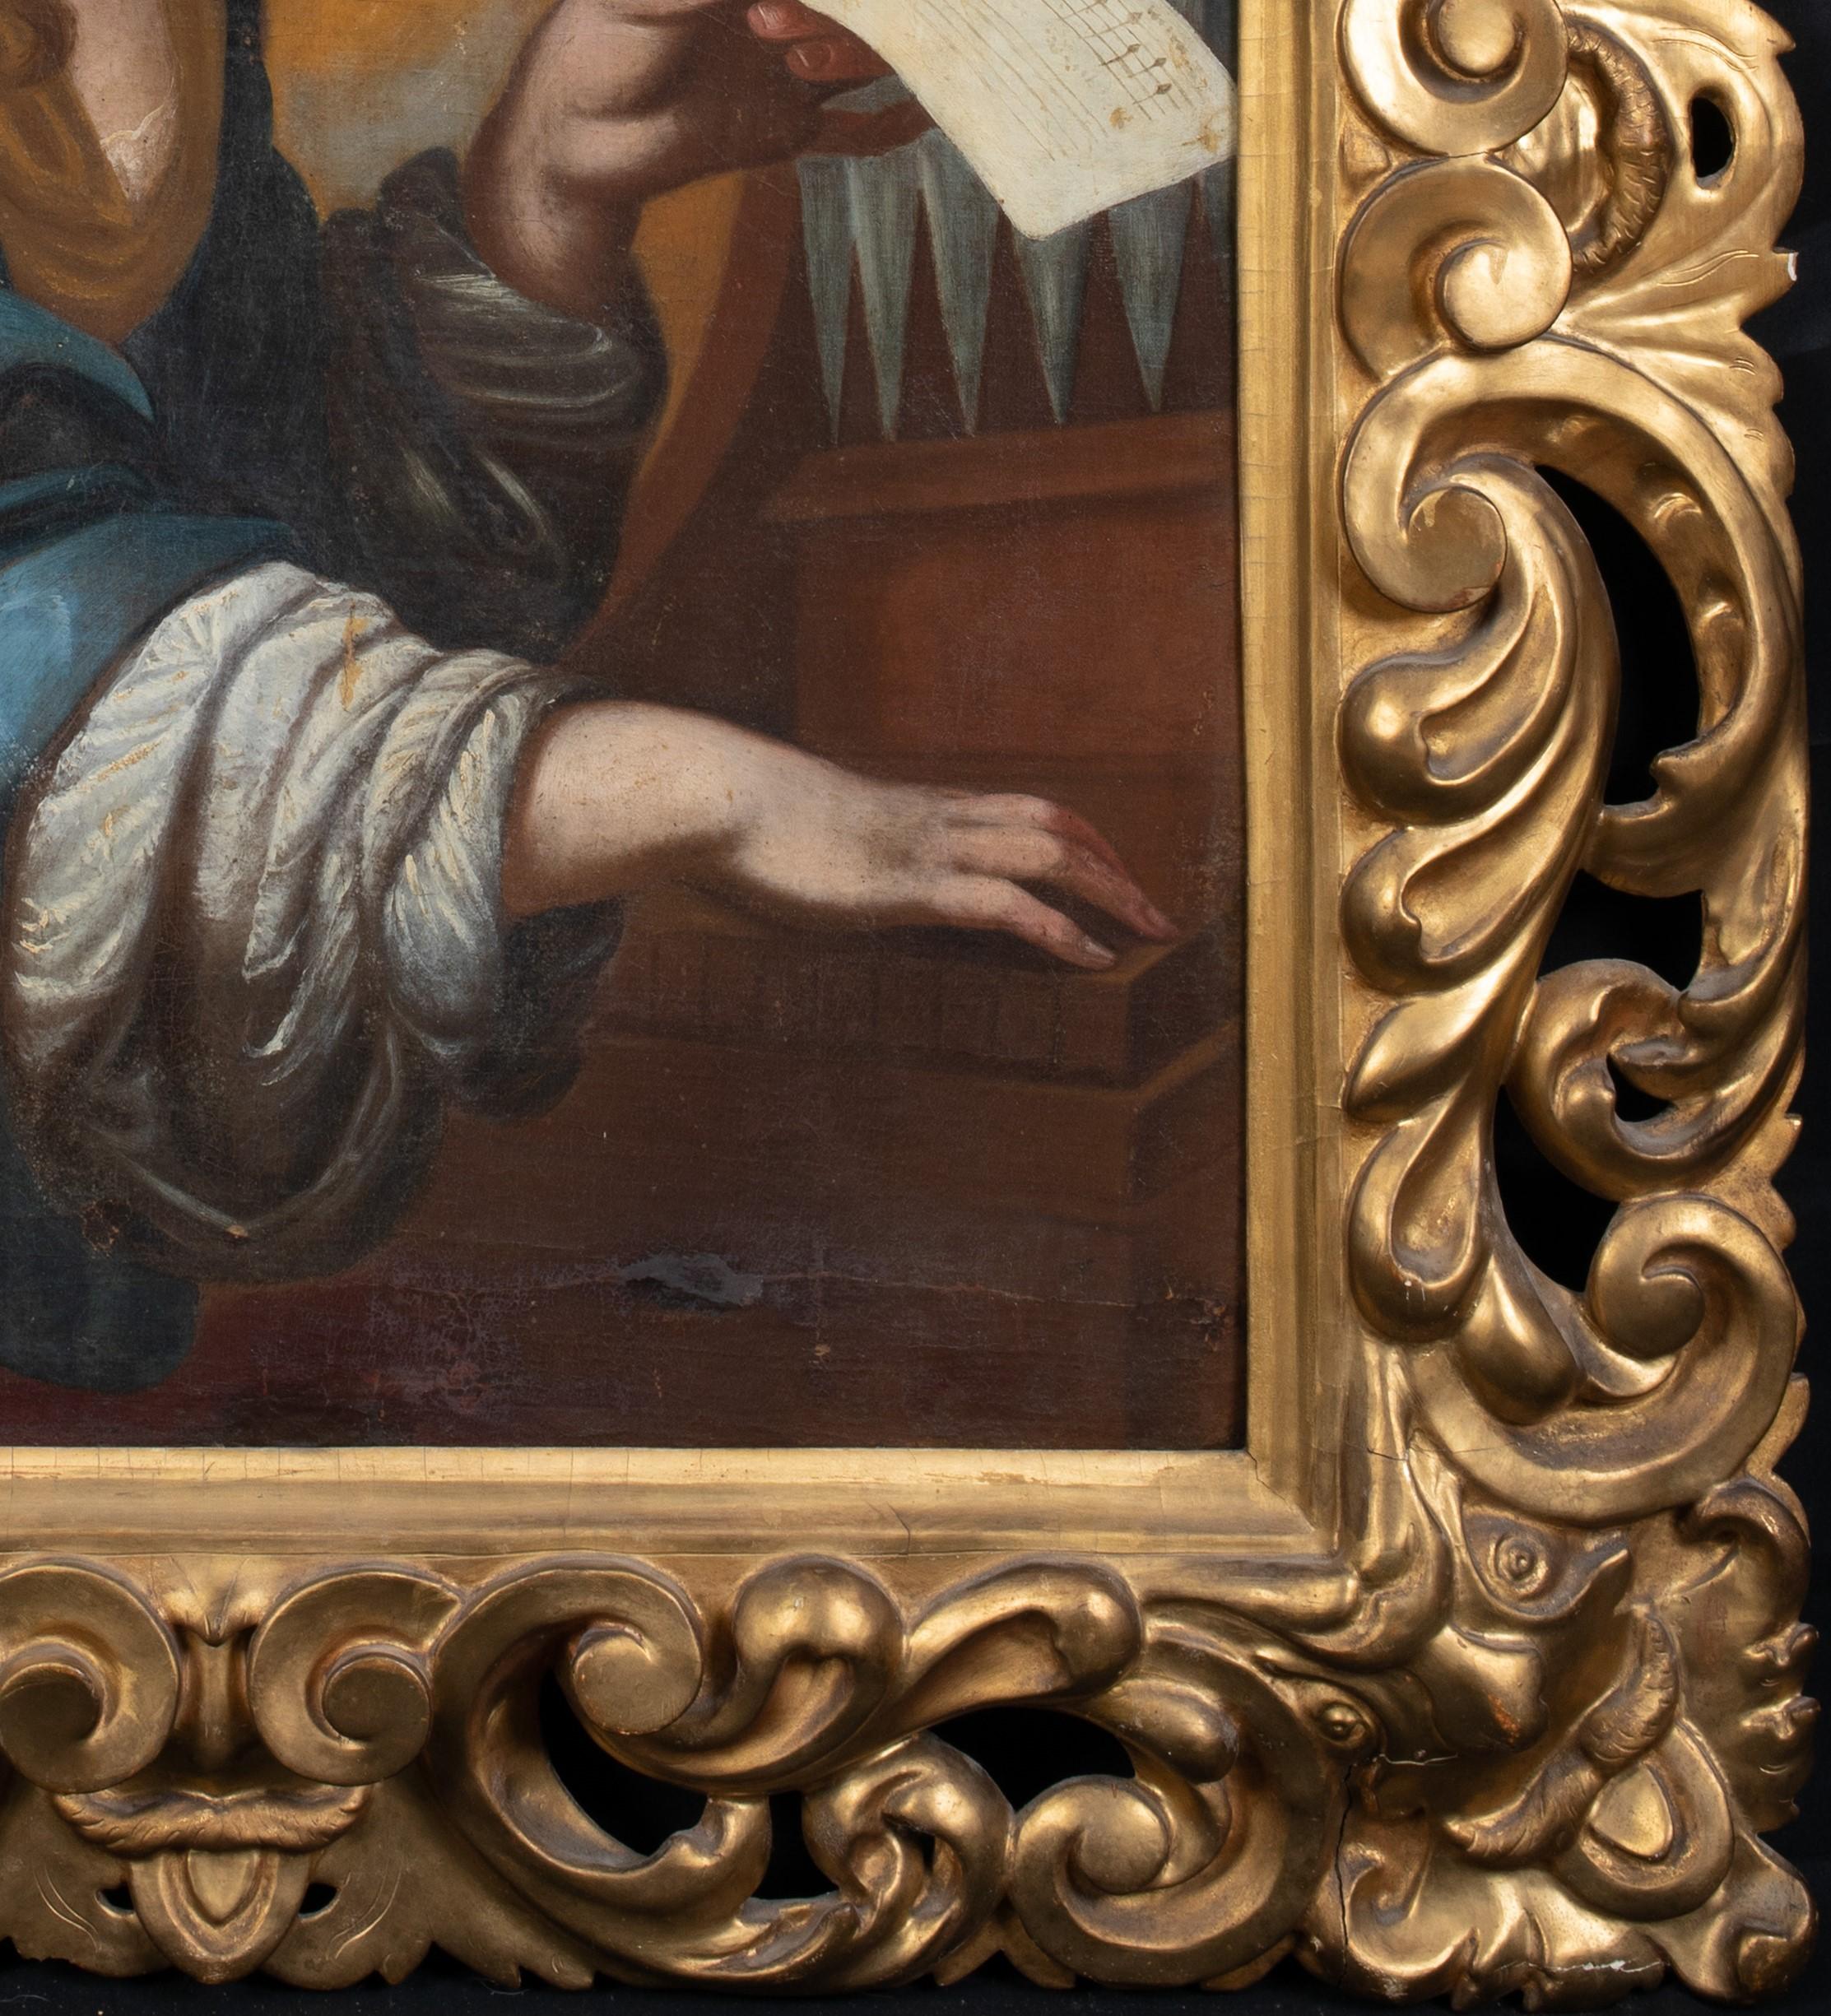 Saint Cecilia, 17th Century

Workshop of ONORIO MARINARI (1627-1716)

Huge 17th Century Italian Old Master depiction of Saint Cecilia, oil on canvas. Early and important work by Marinari that would have been produced in his workshop in Florence